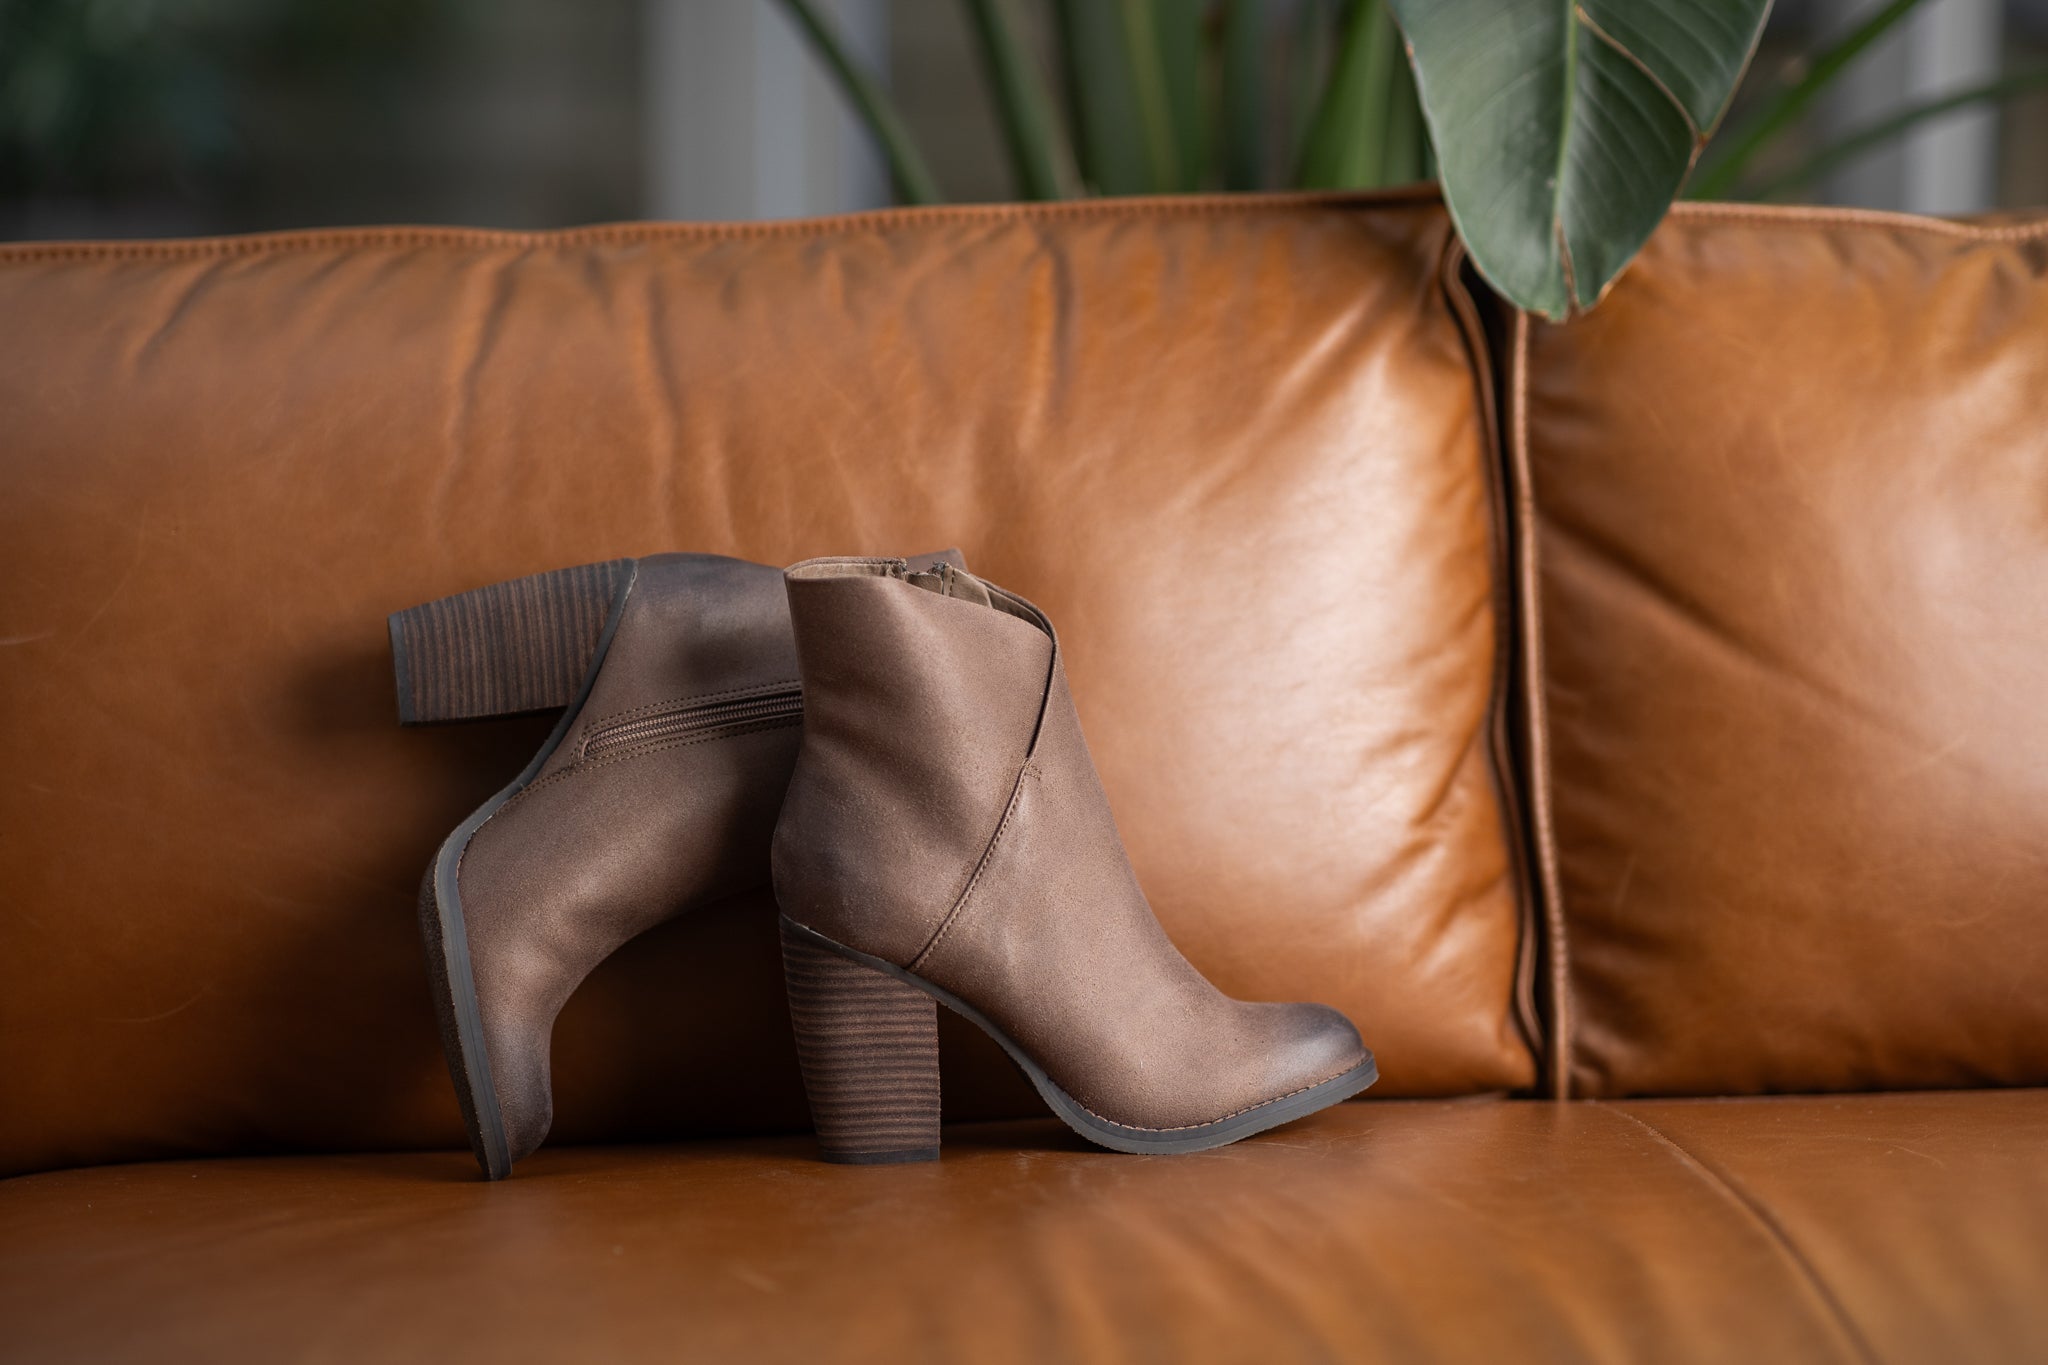 Bennington Asymmetrical Fold Over Ankle Boot in Taupe